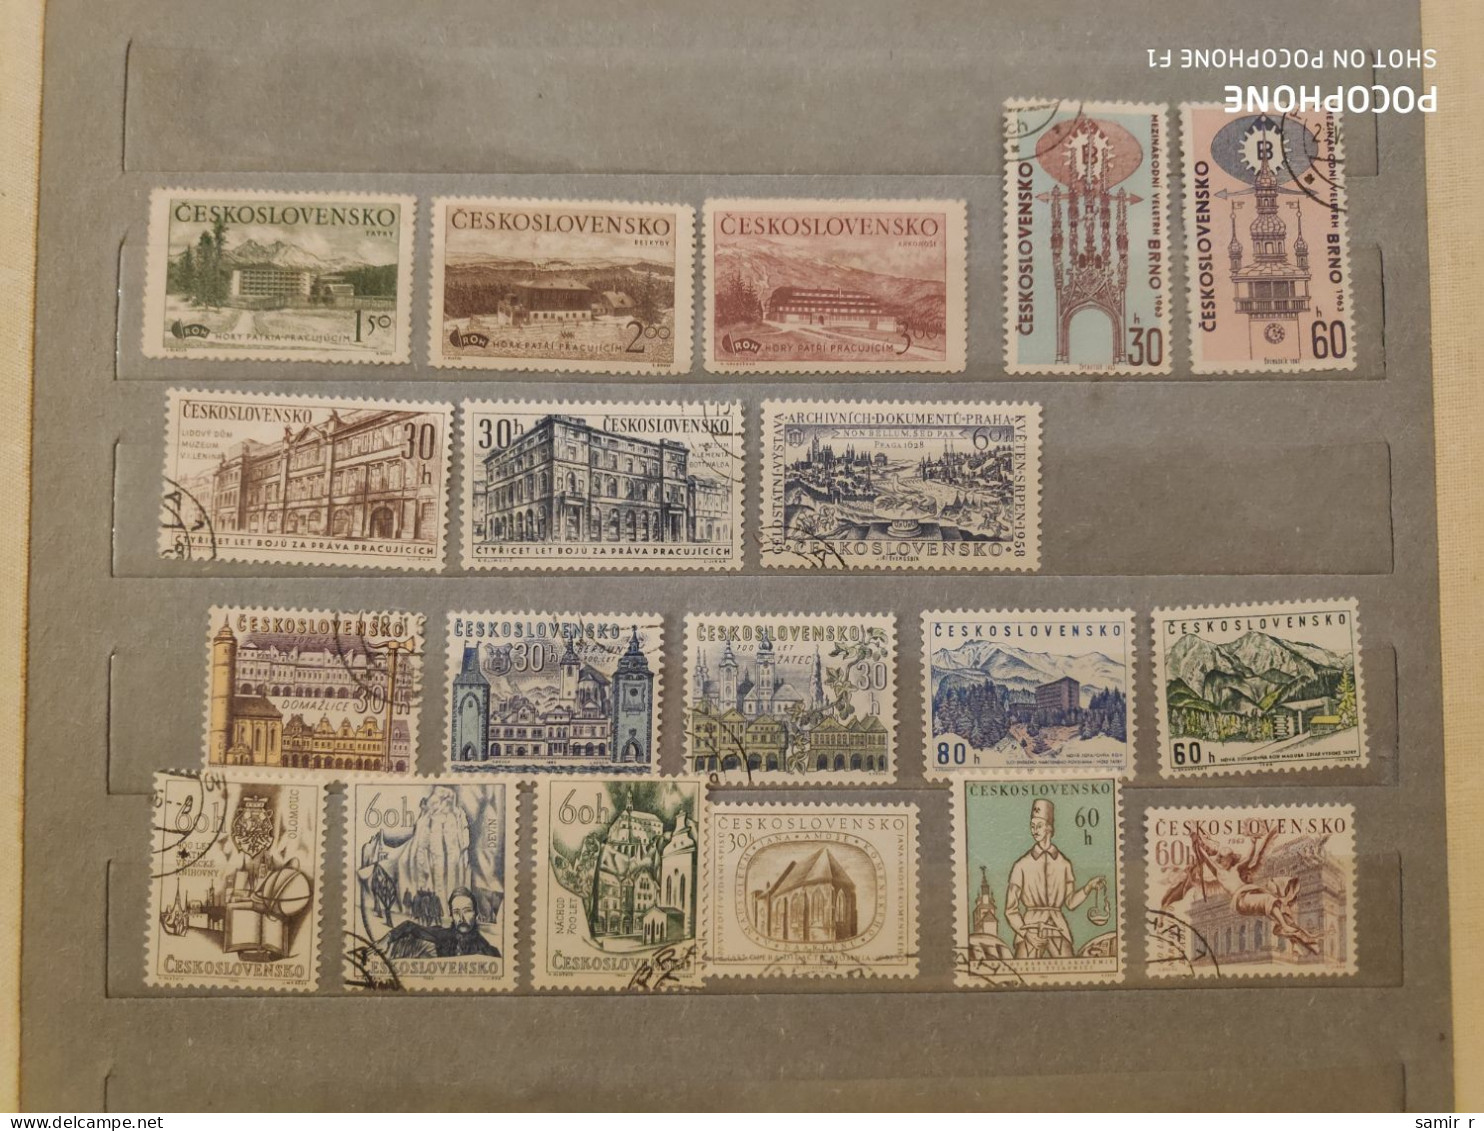 Czechoslovakia	Architecture Landscapes (F96) - Used Stamps